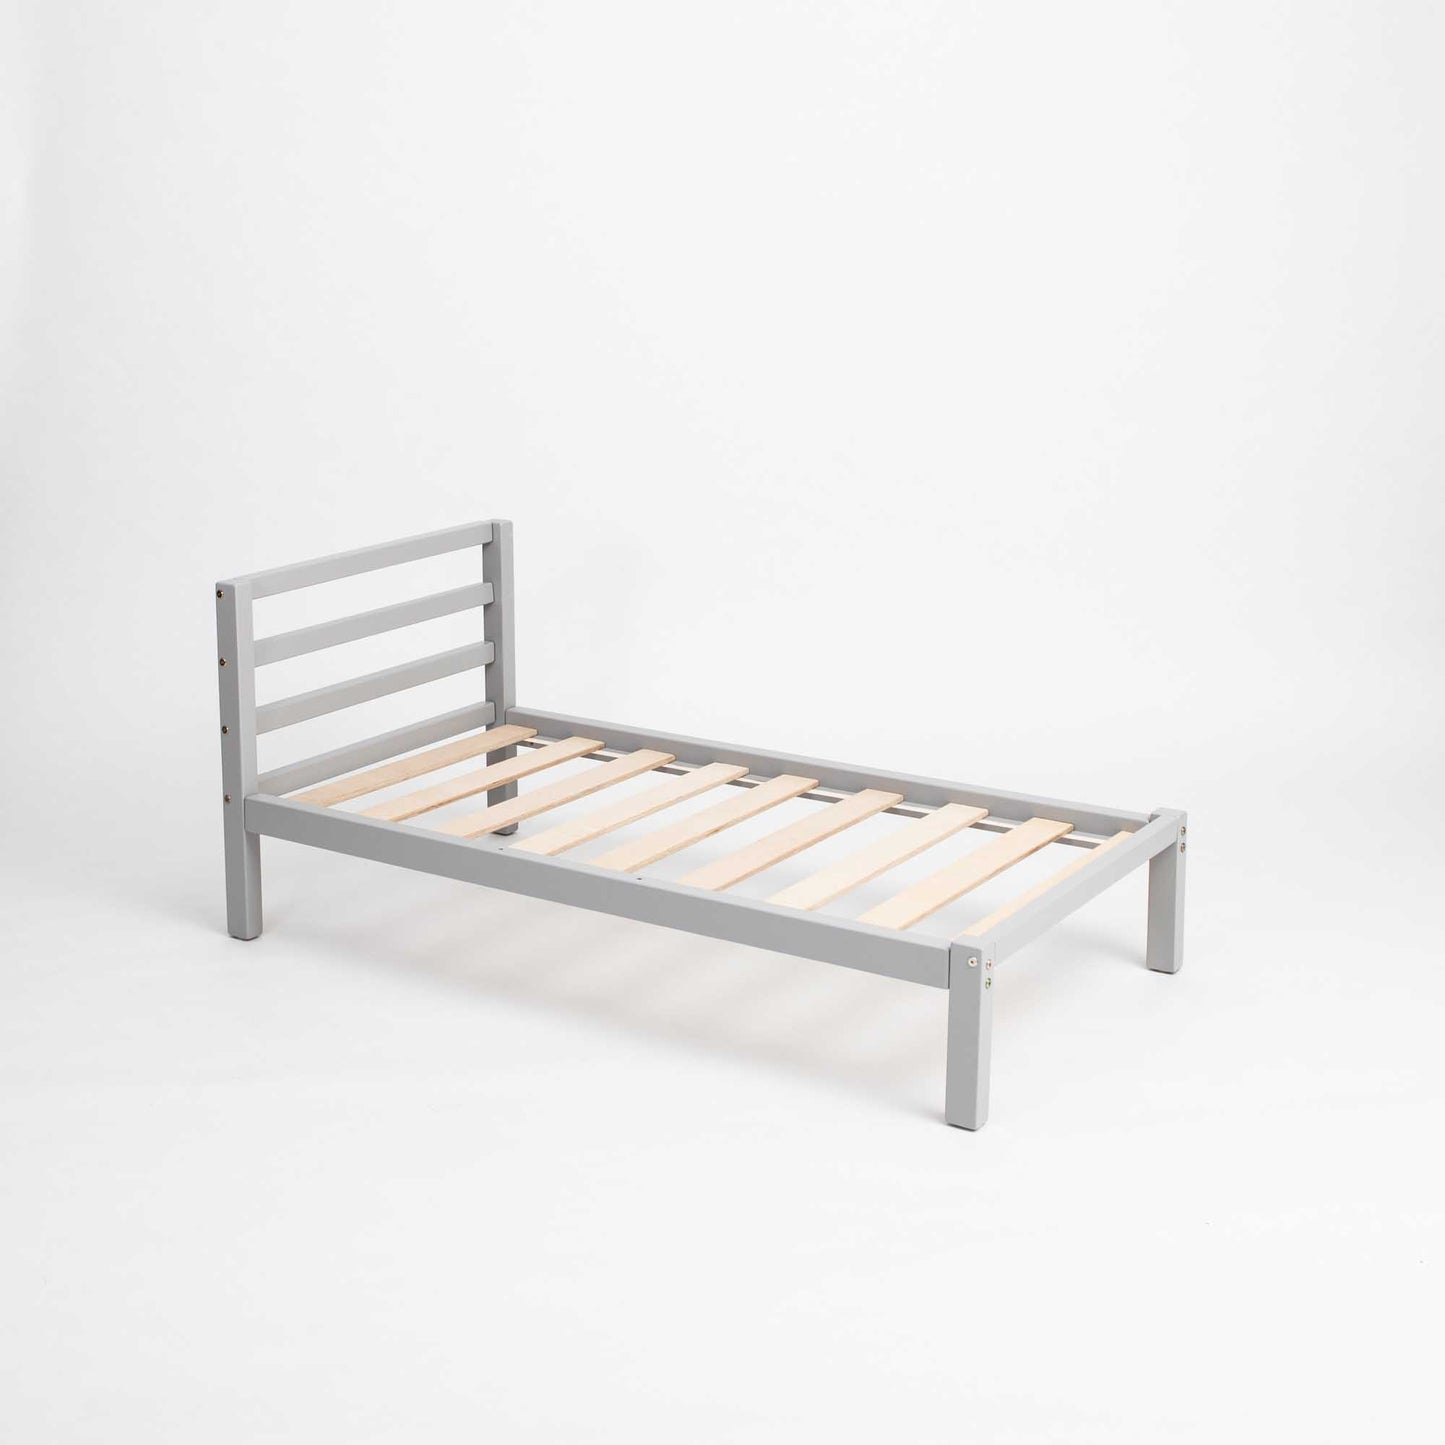 A sturdy, Sweet Home From Wood Montessori-inspired toddler bed with wooden slats on a white background.